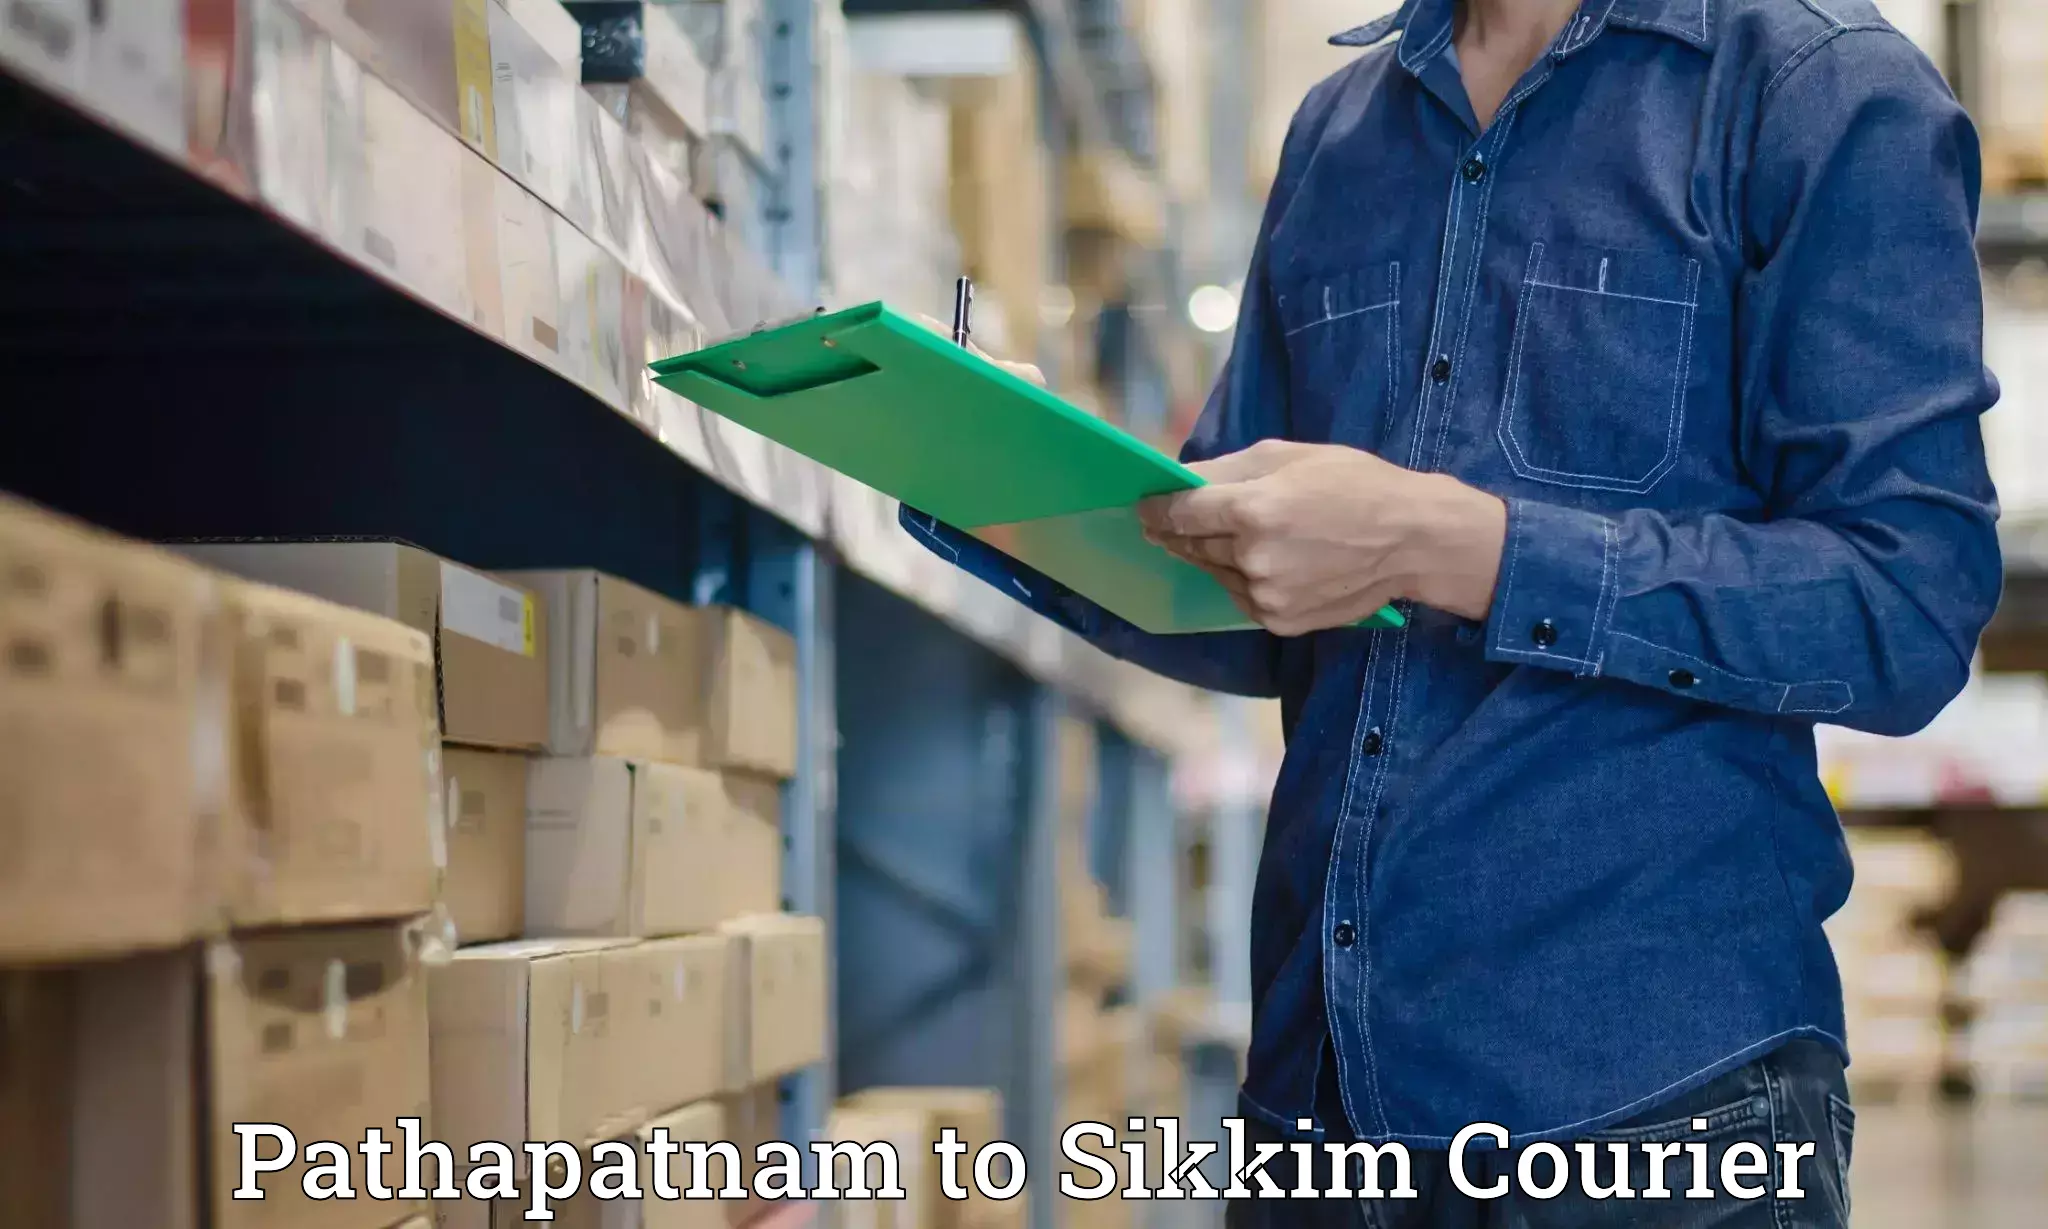 Global logistics network Pathapatnam to South Sikkim